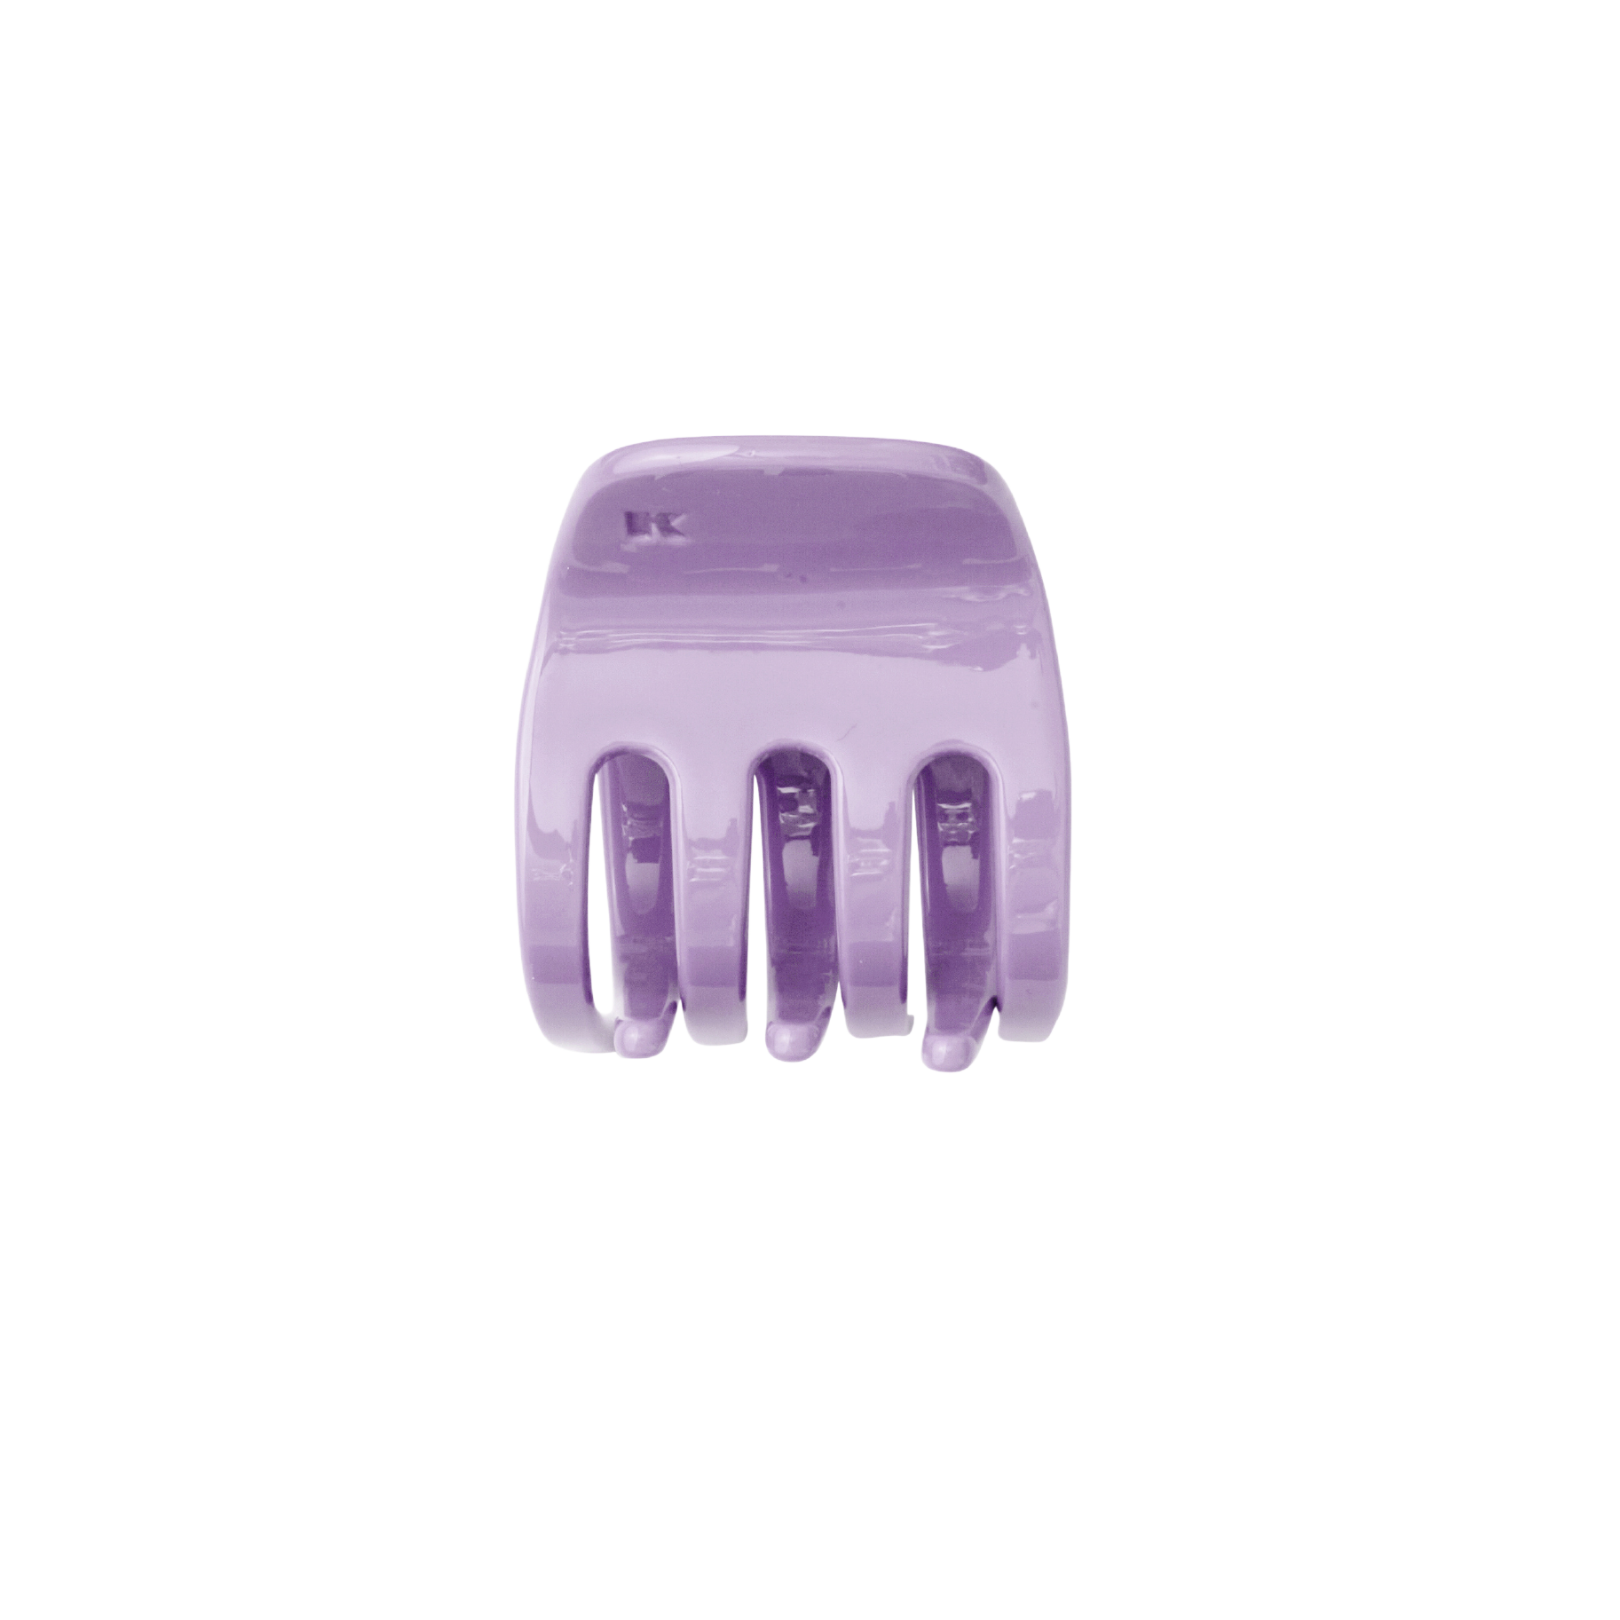 The Small Hair Claw Clip in Ube